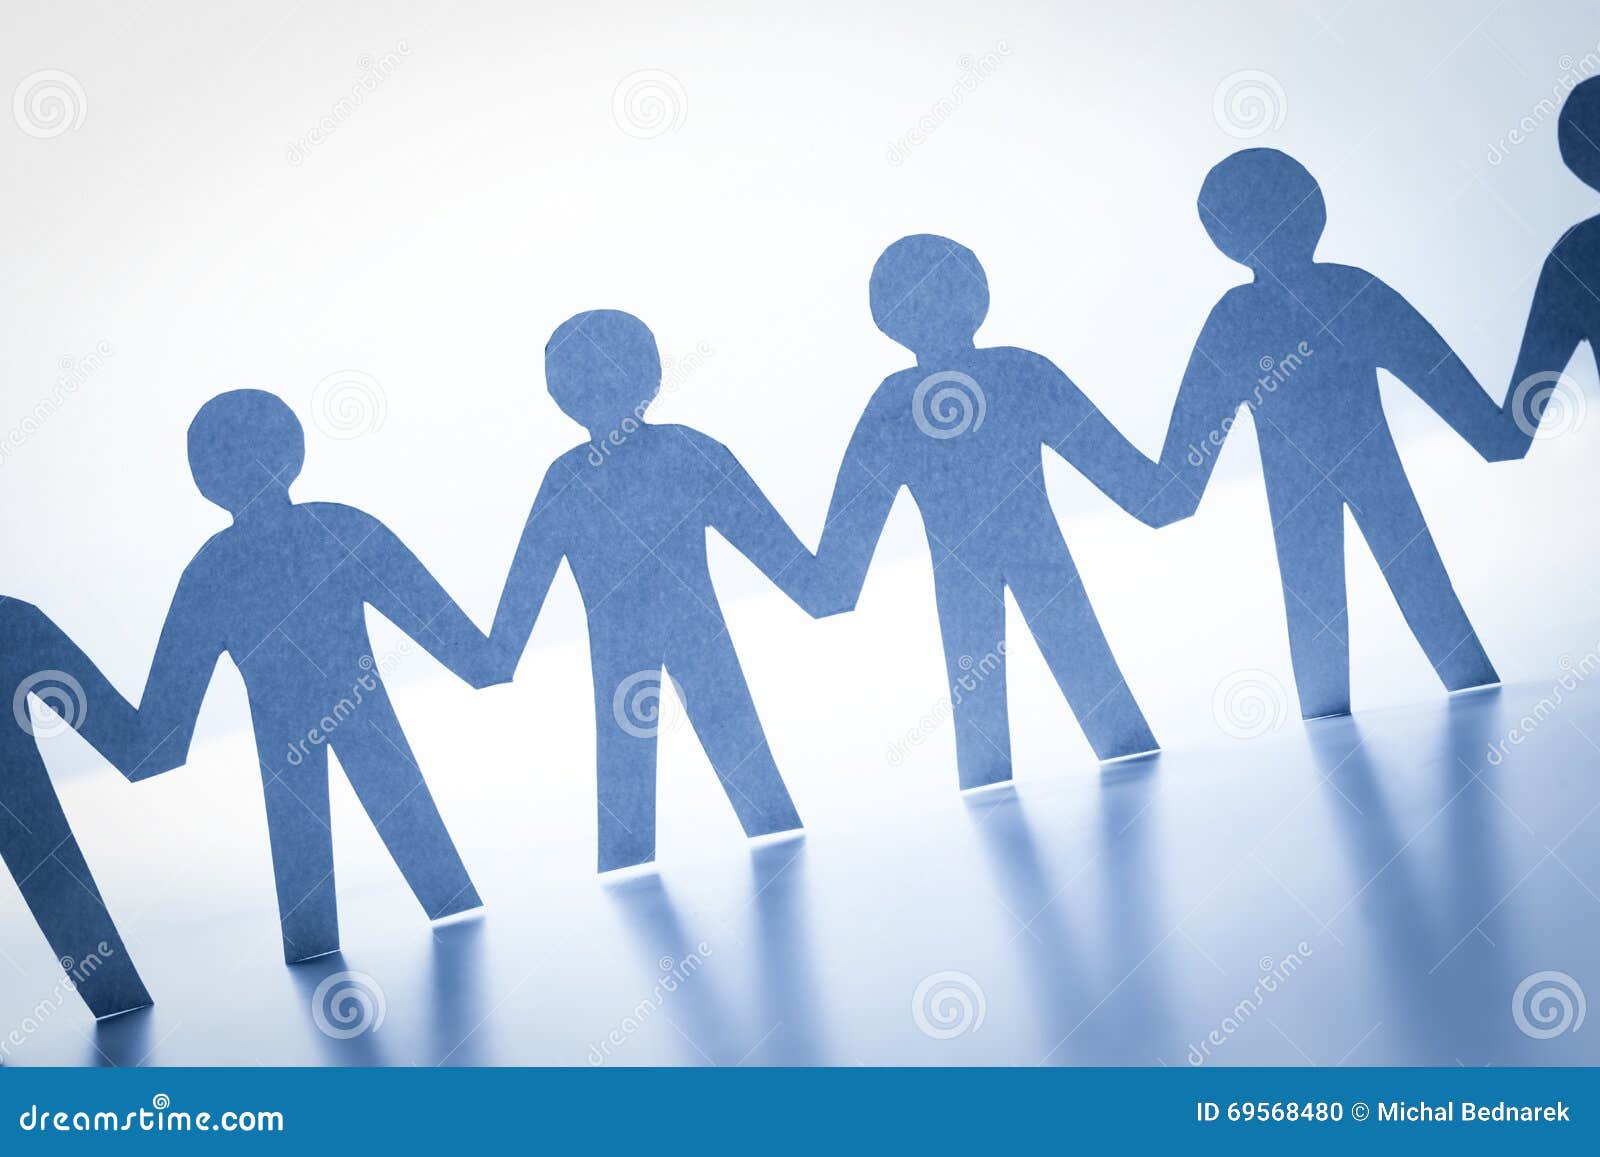 paper people standing together hand in hand. team, society, business concept